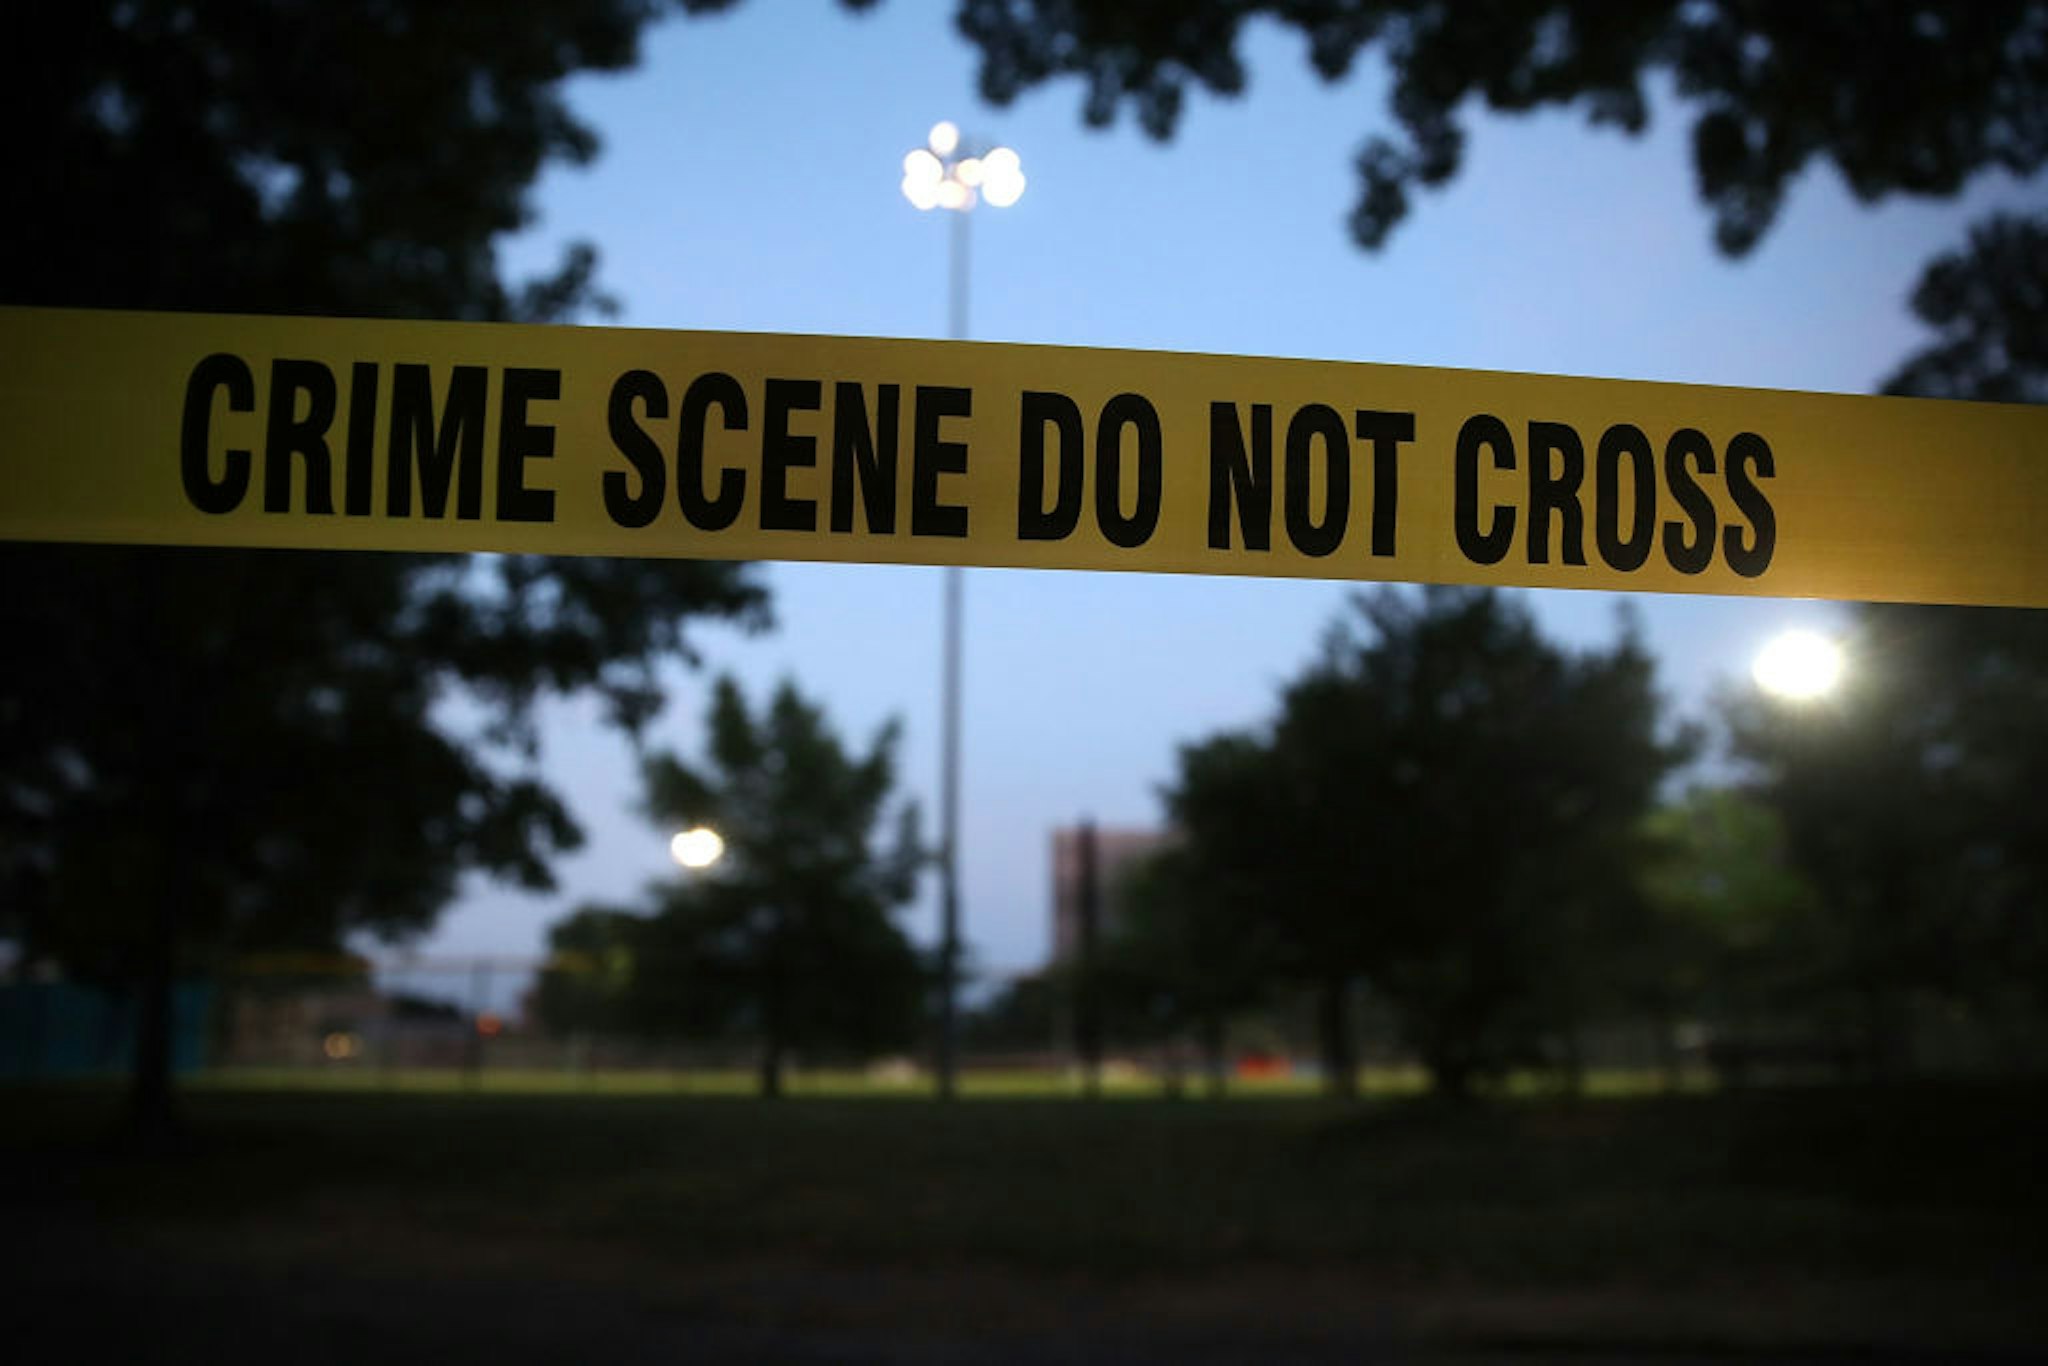 ALEXANDRIA, VA - JUNE 15: Crime scene tape surrounds the Eugene Simpson Field, the site where a gunman opened fire June 15, 2017 in Alexandria, Virginia. Multiple injuries were reported from the instance, the site where a congressional baseball team was holding an early morning practice, including House Republican Whip Steve Scalise (R-LA) who was shot in the hip. (Photo by Mark Wilson/Getty Images)